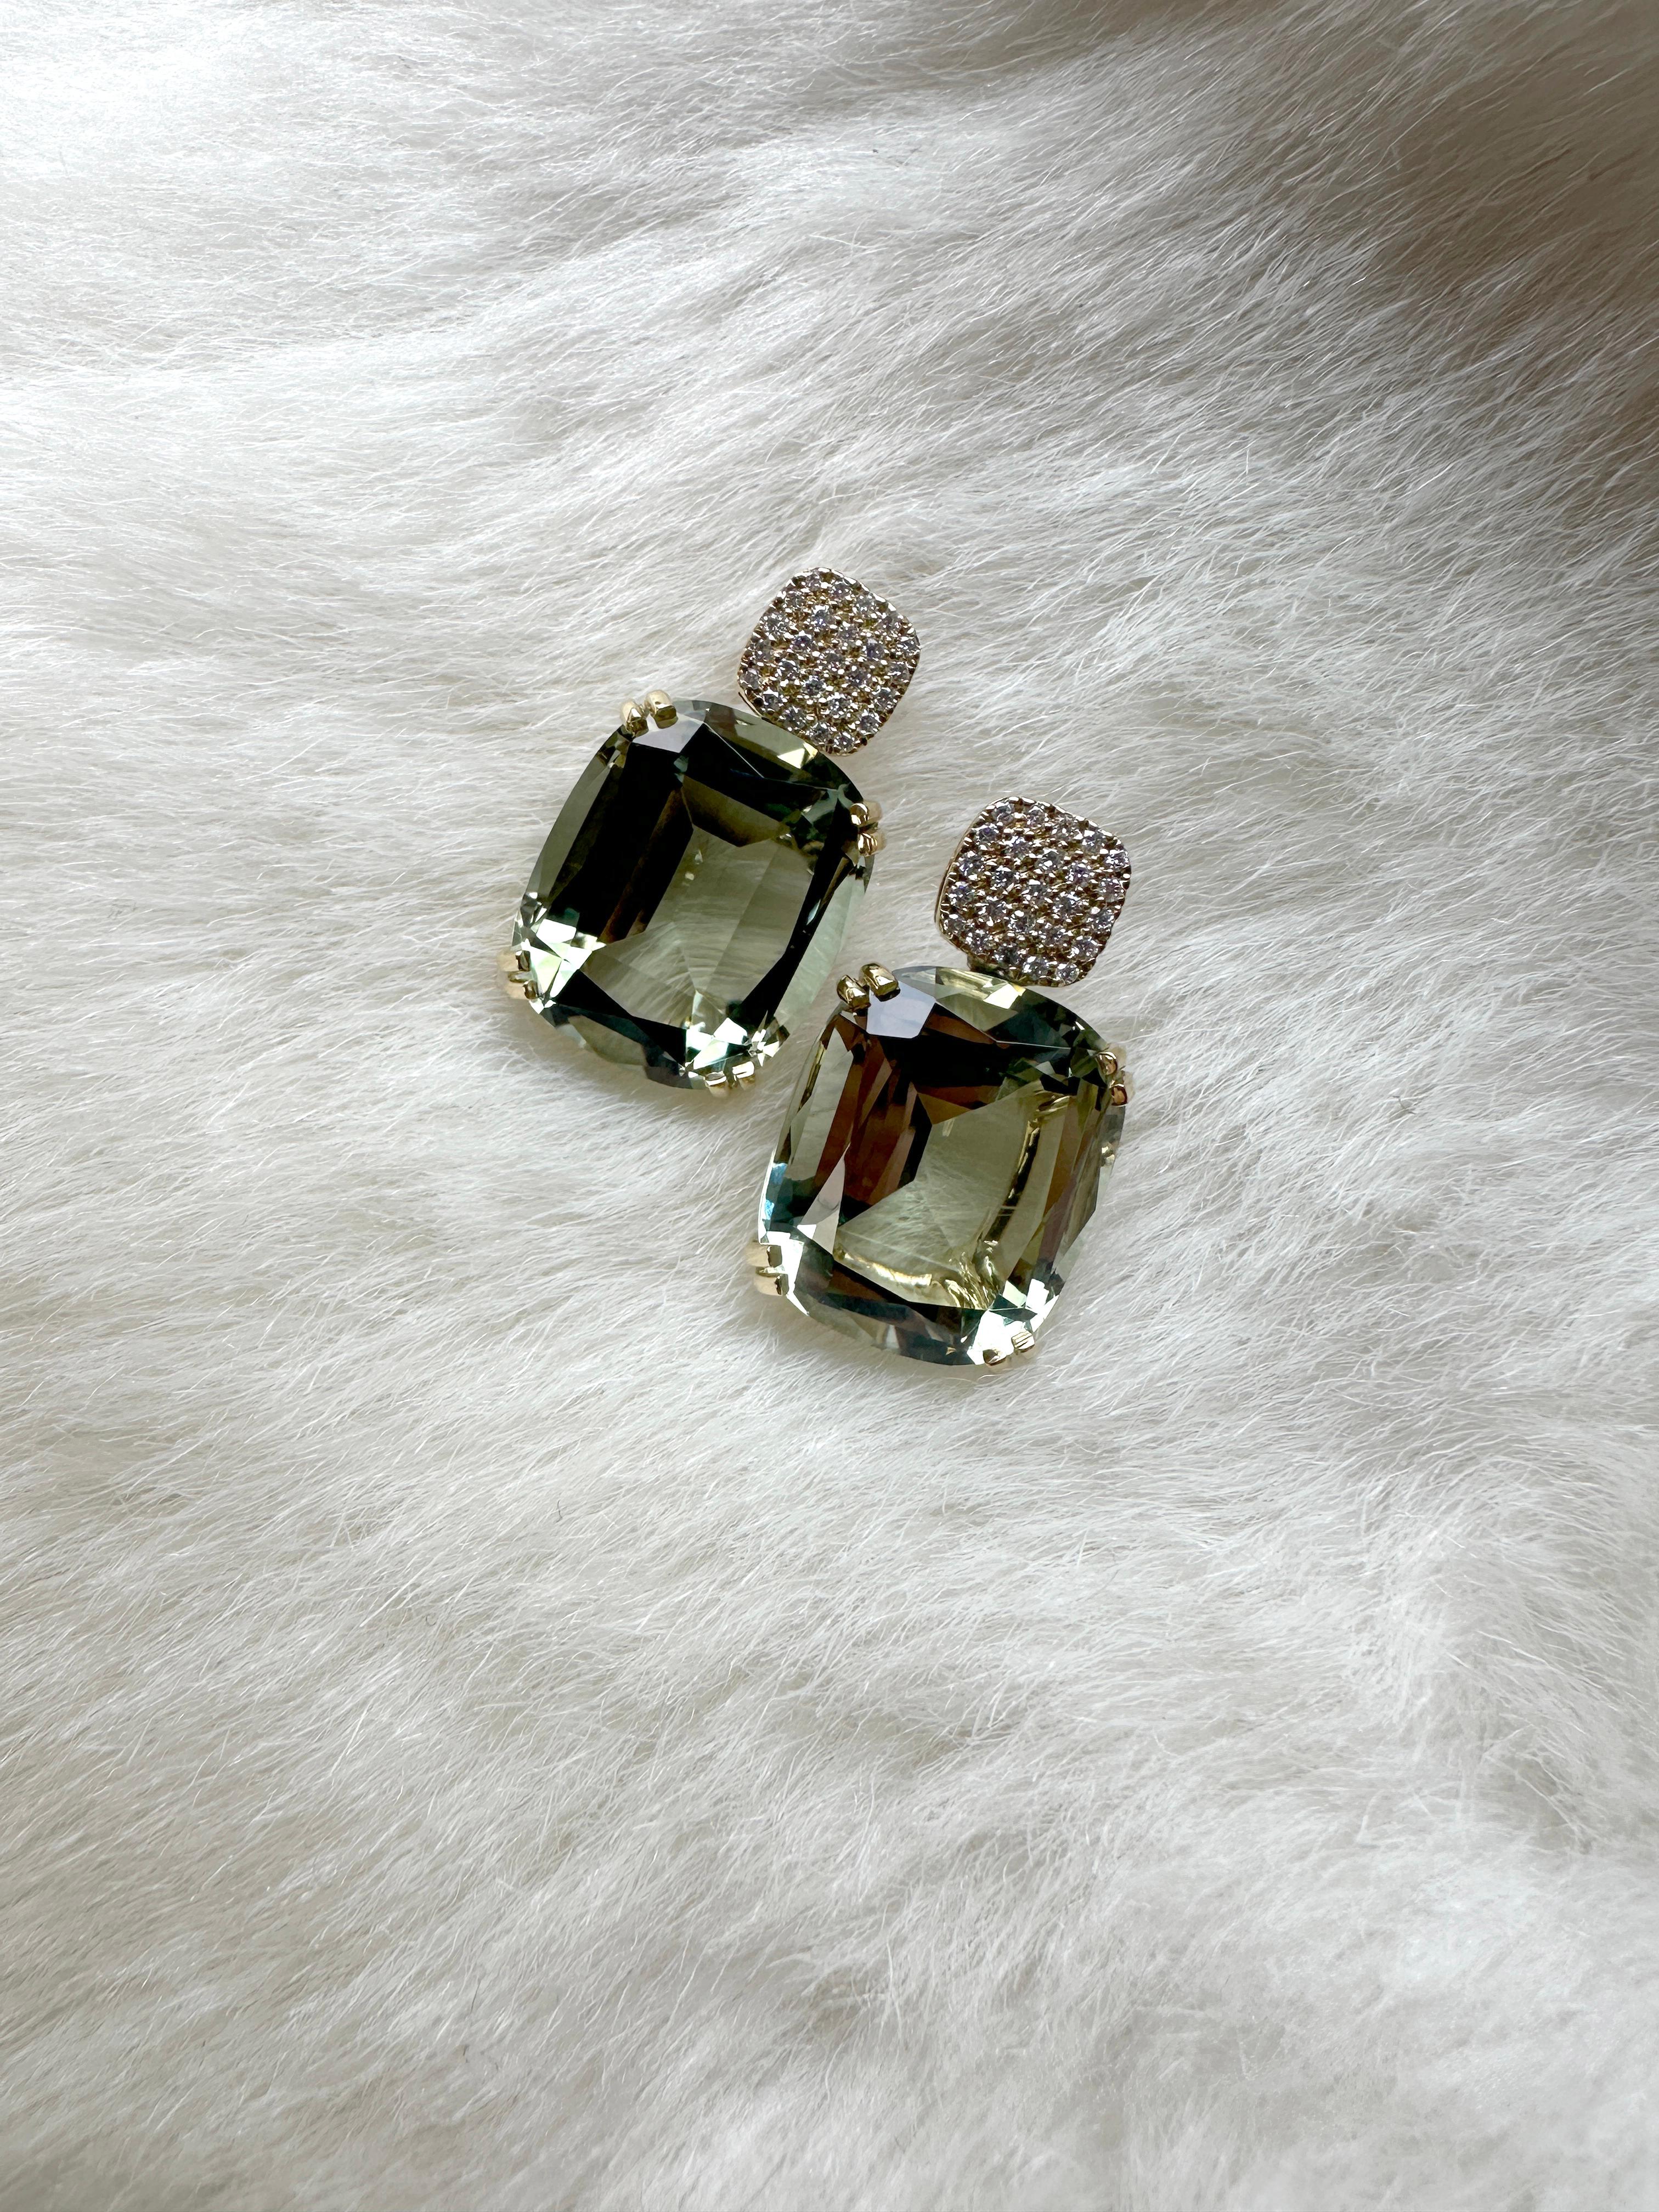 Introducing the stunning Prasiolite Cushion & Diamonds Earrings from our popular 'Gossip' Collection. 
The focal point of these earrings is the mesmerizing Prasiolite cushion-cut gemstone. The cushion-cut shape adds a touch of vintage charm, while